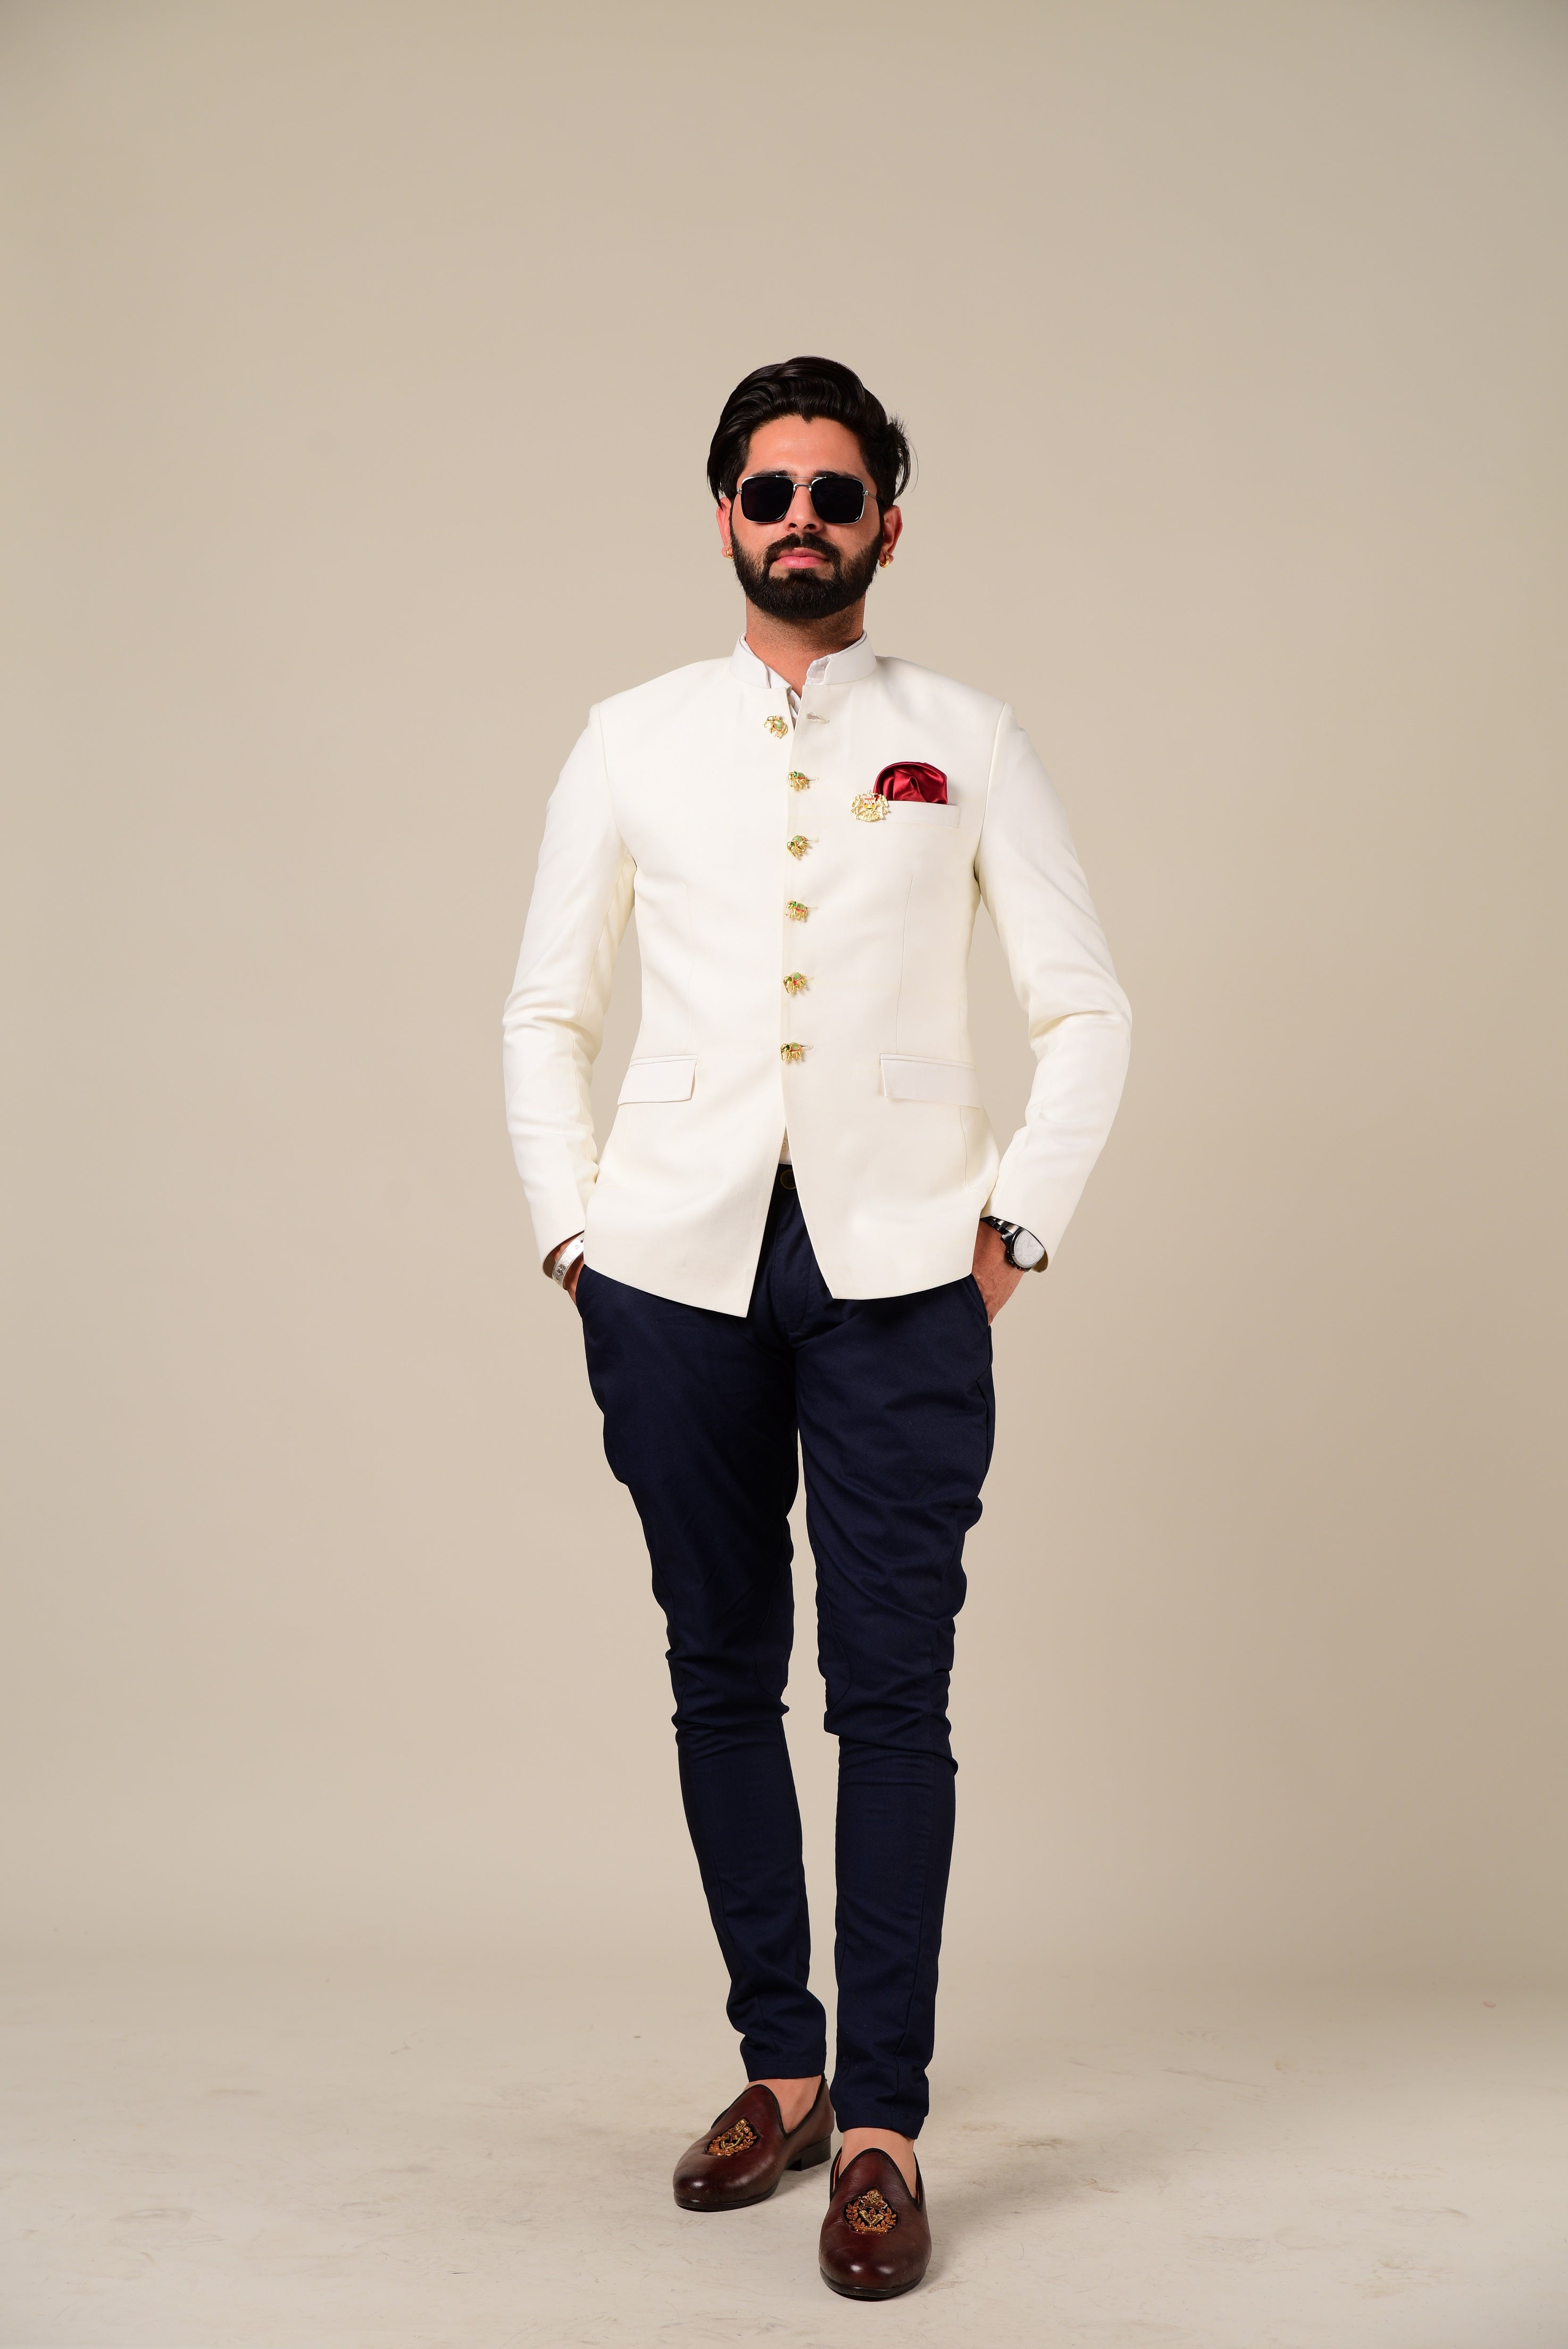 Exclusive White Jodhpuri Bandhgala with Elephant Buttons| Black Trouser | Partywear for Grooms and Friends | Handcrafted Vintage Buttons